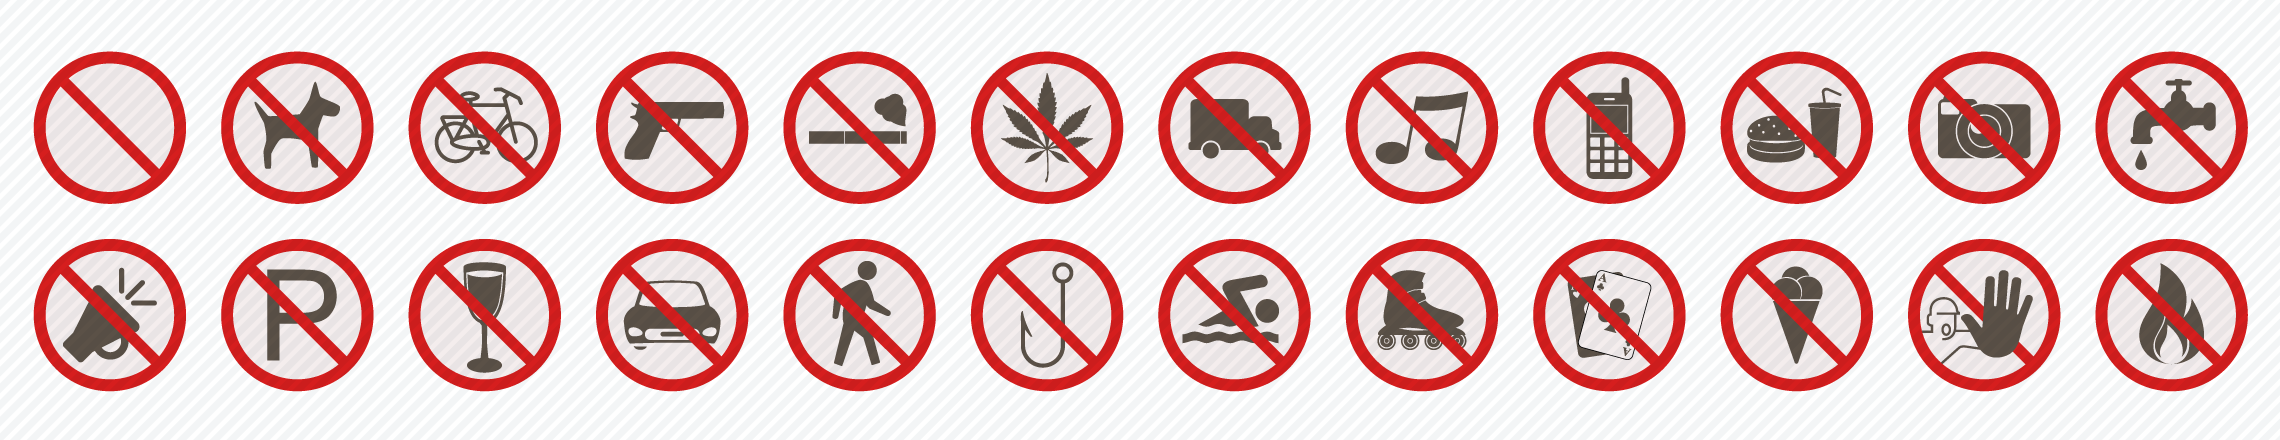 Prohibition_Signs_Flat_Icons